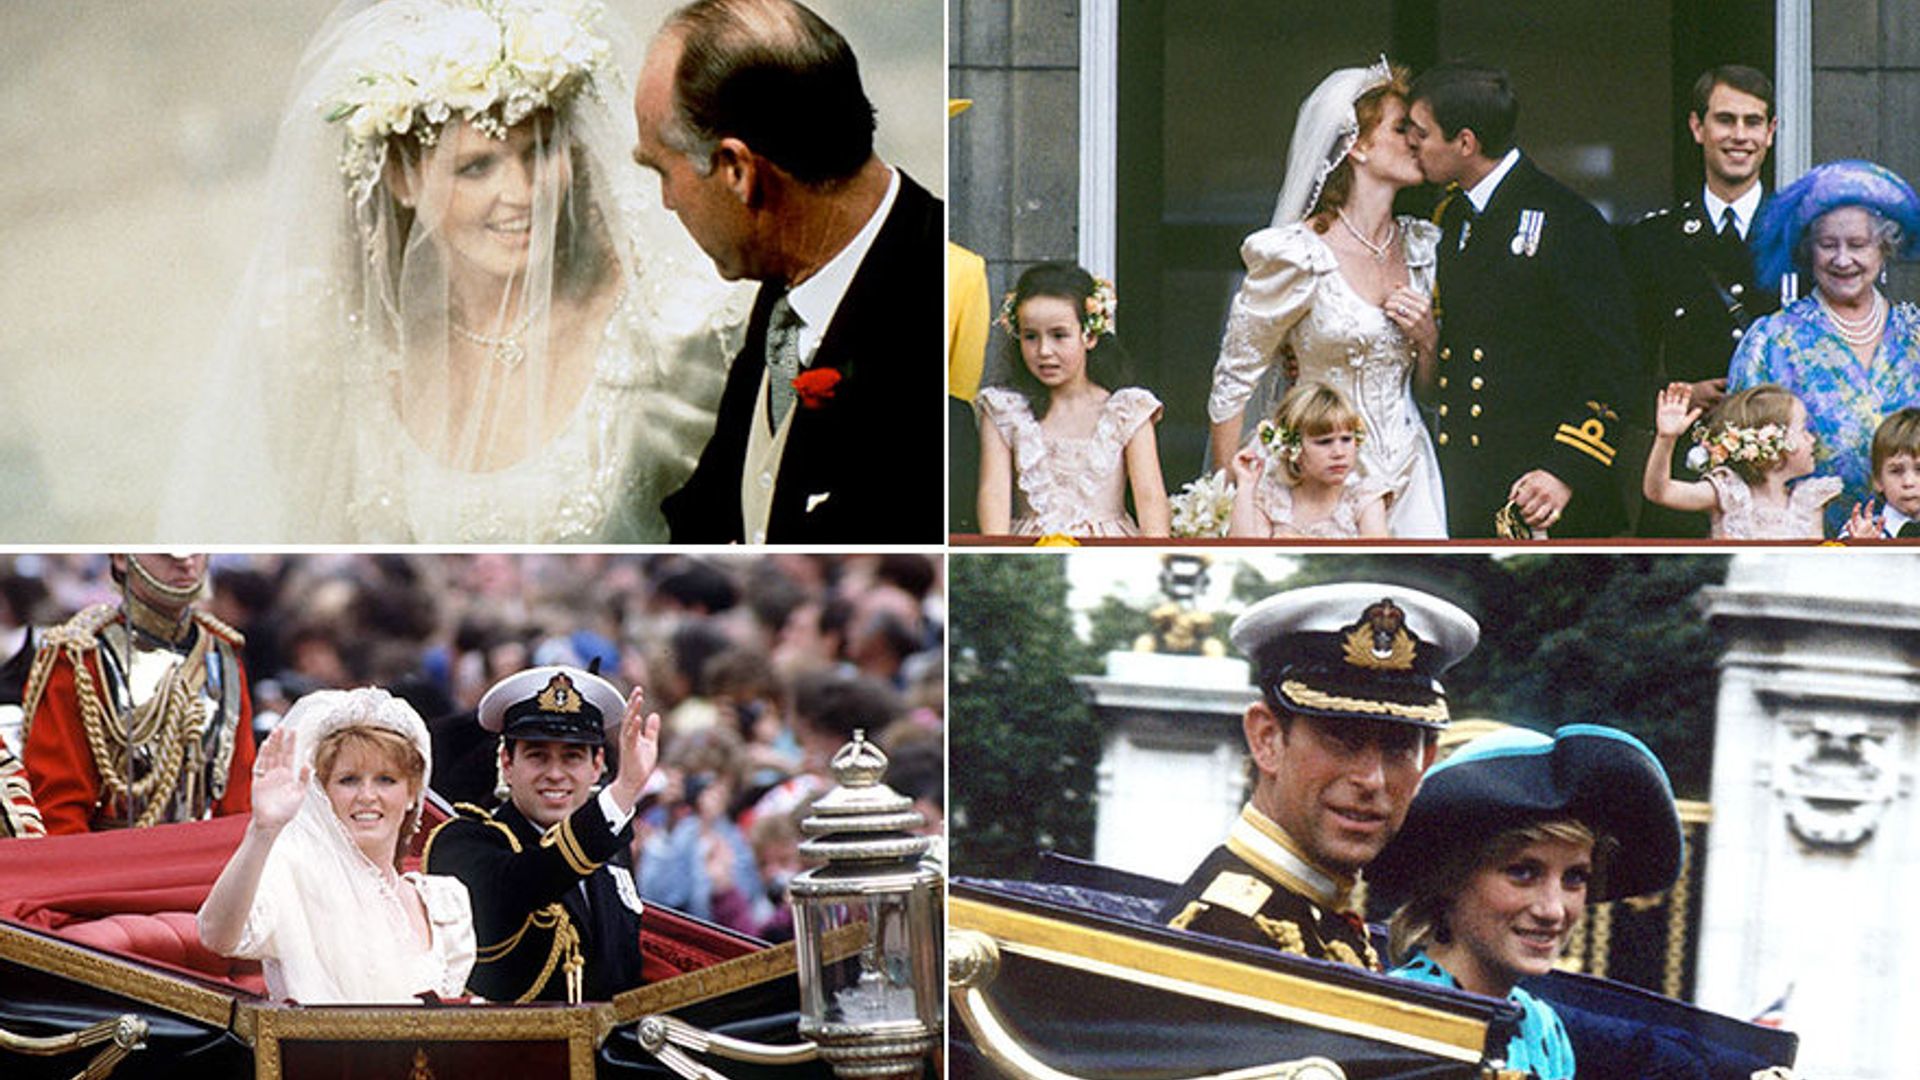 Sarah, Duchess of York and Prince Andrew's 1986 royal wedding: A look back at the best photos